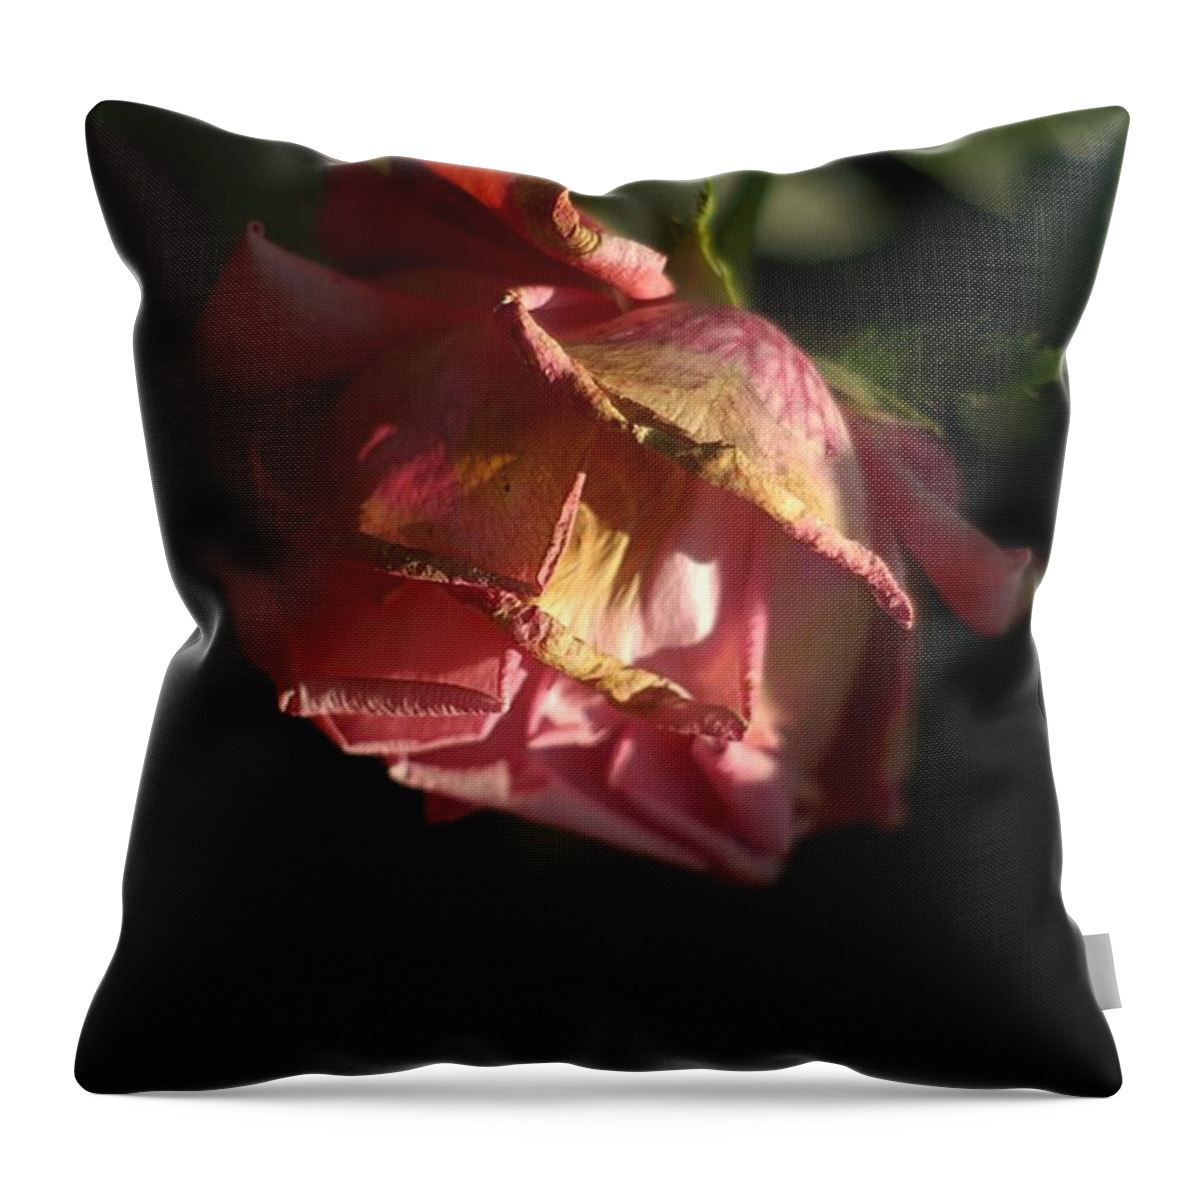 Pink Rose Throw Pillow featuring the photograph Antique Pink Rose by Suzanne Powers